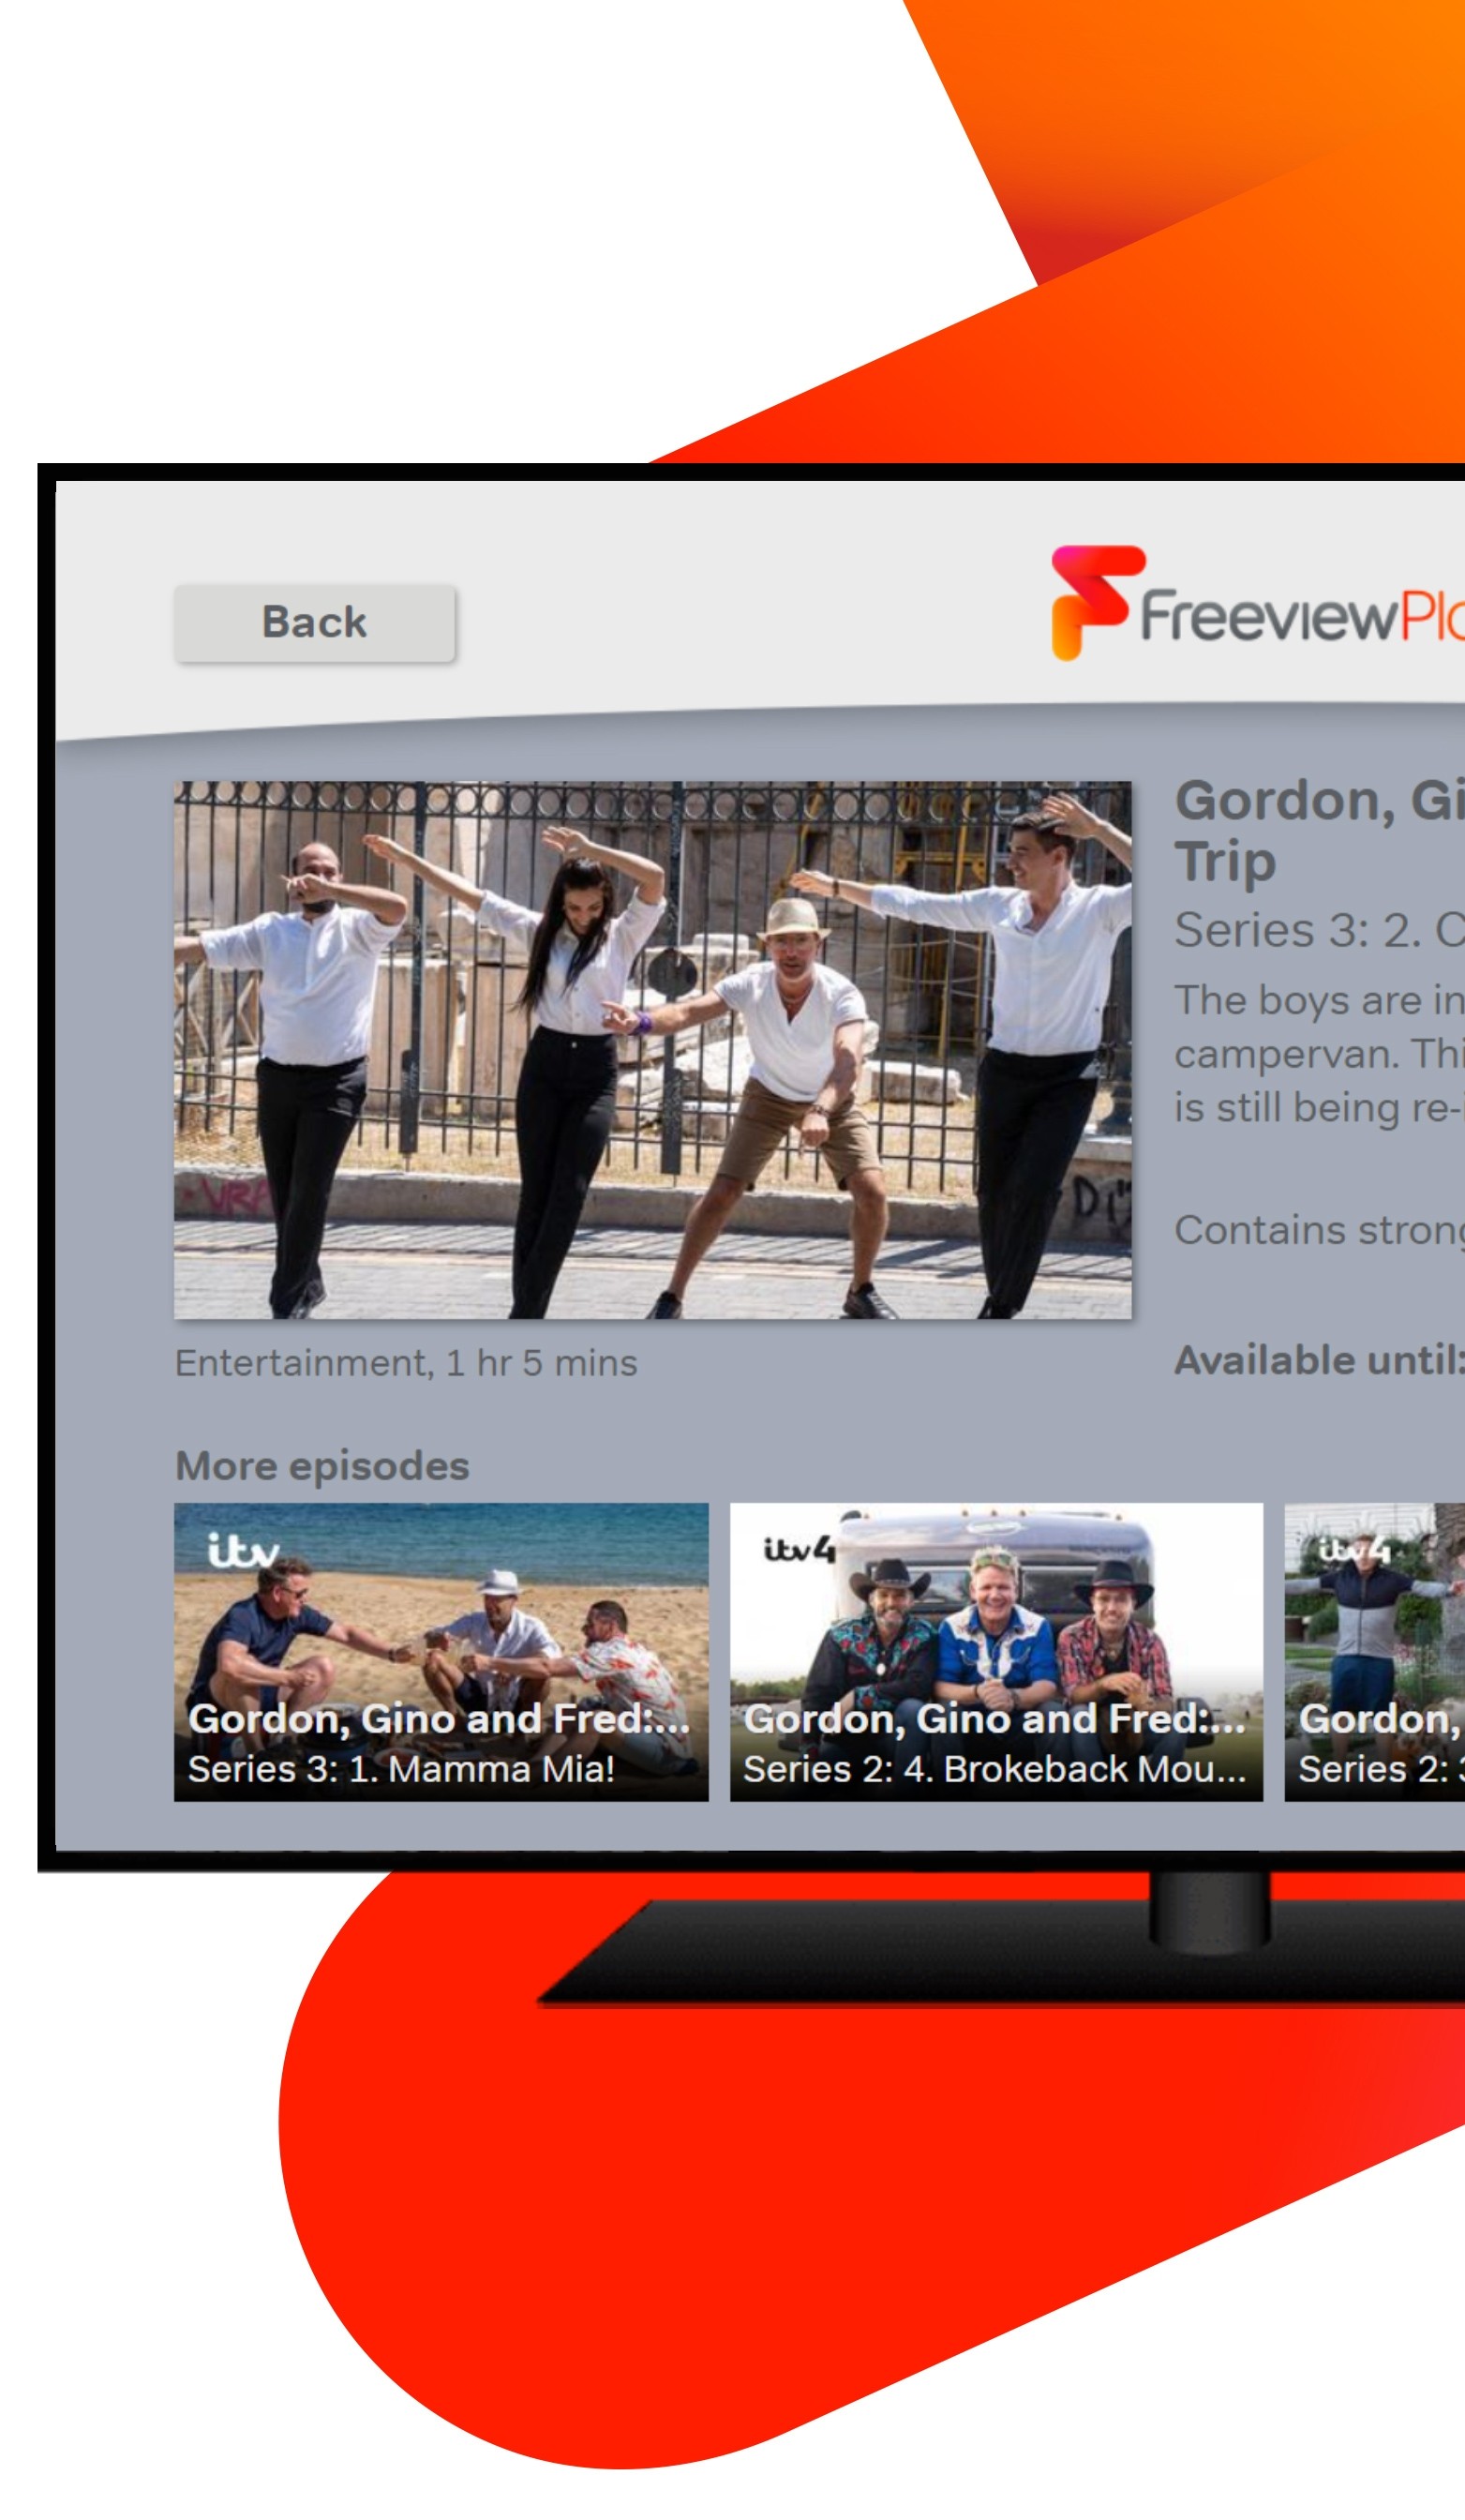 Freeview Play Travel